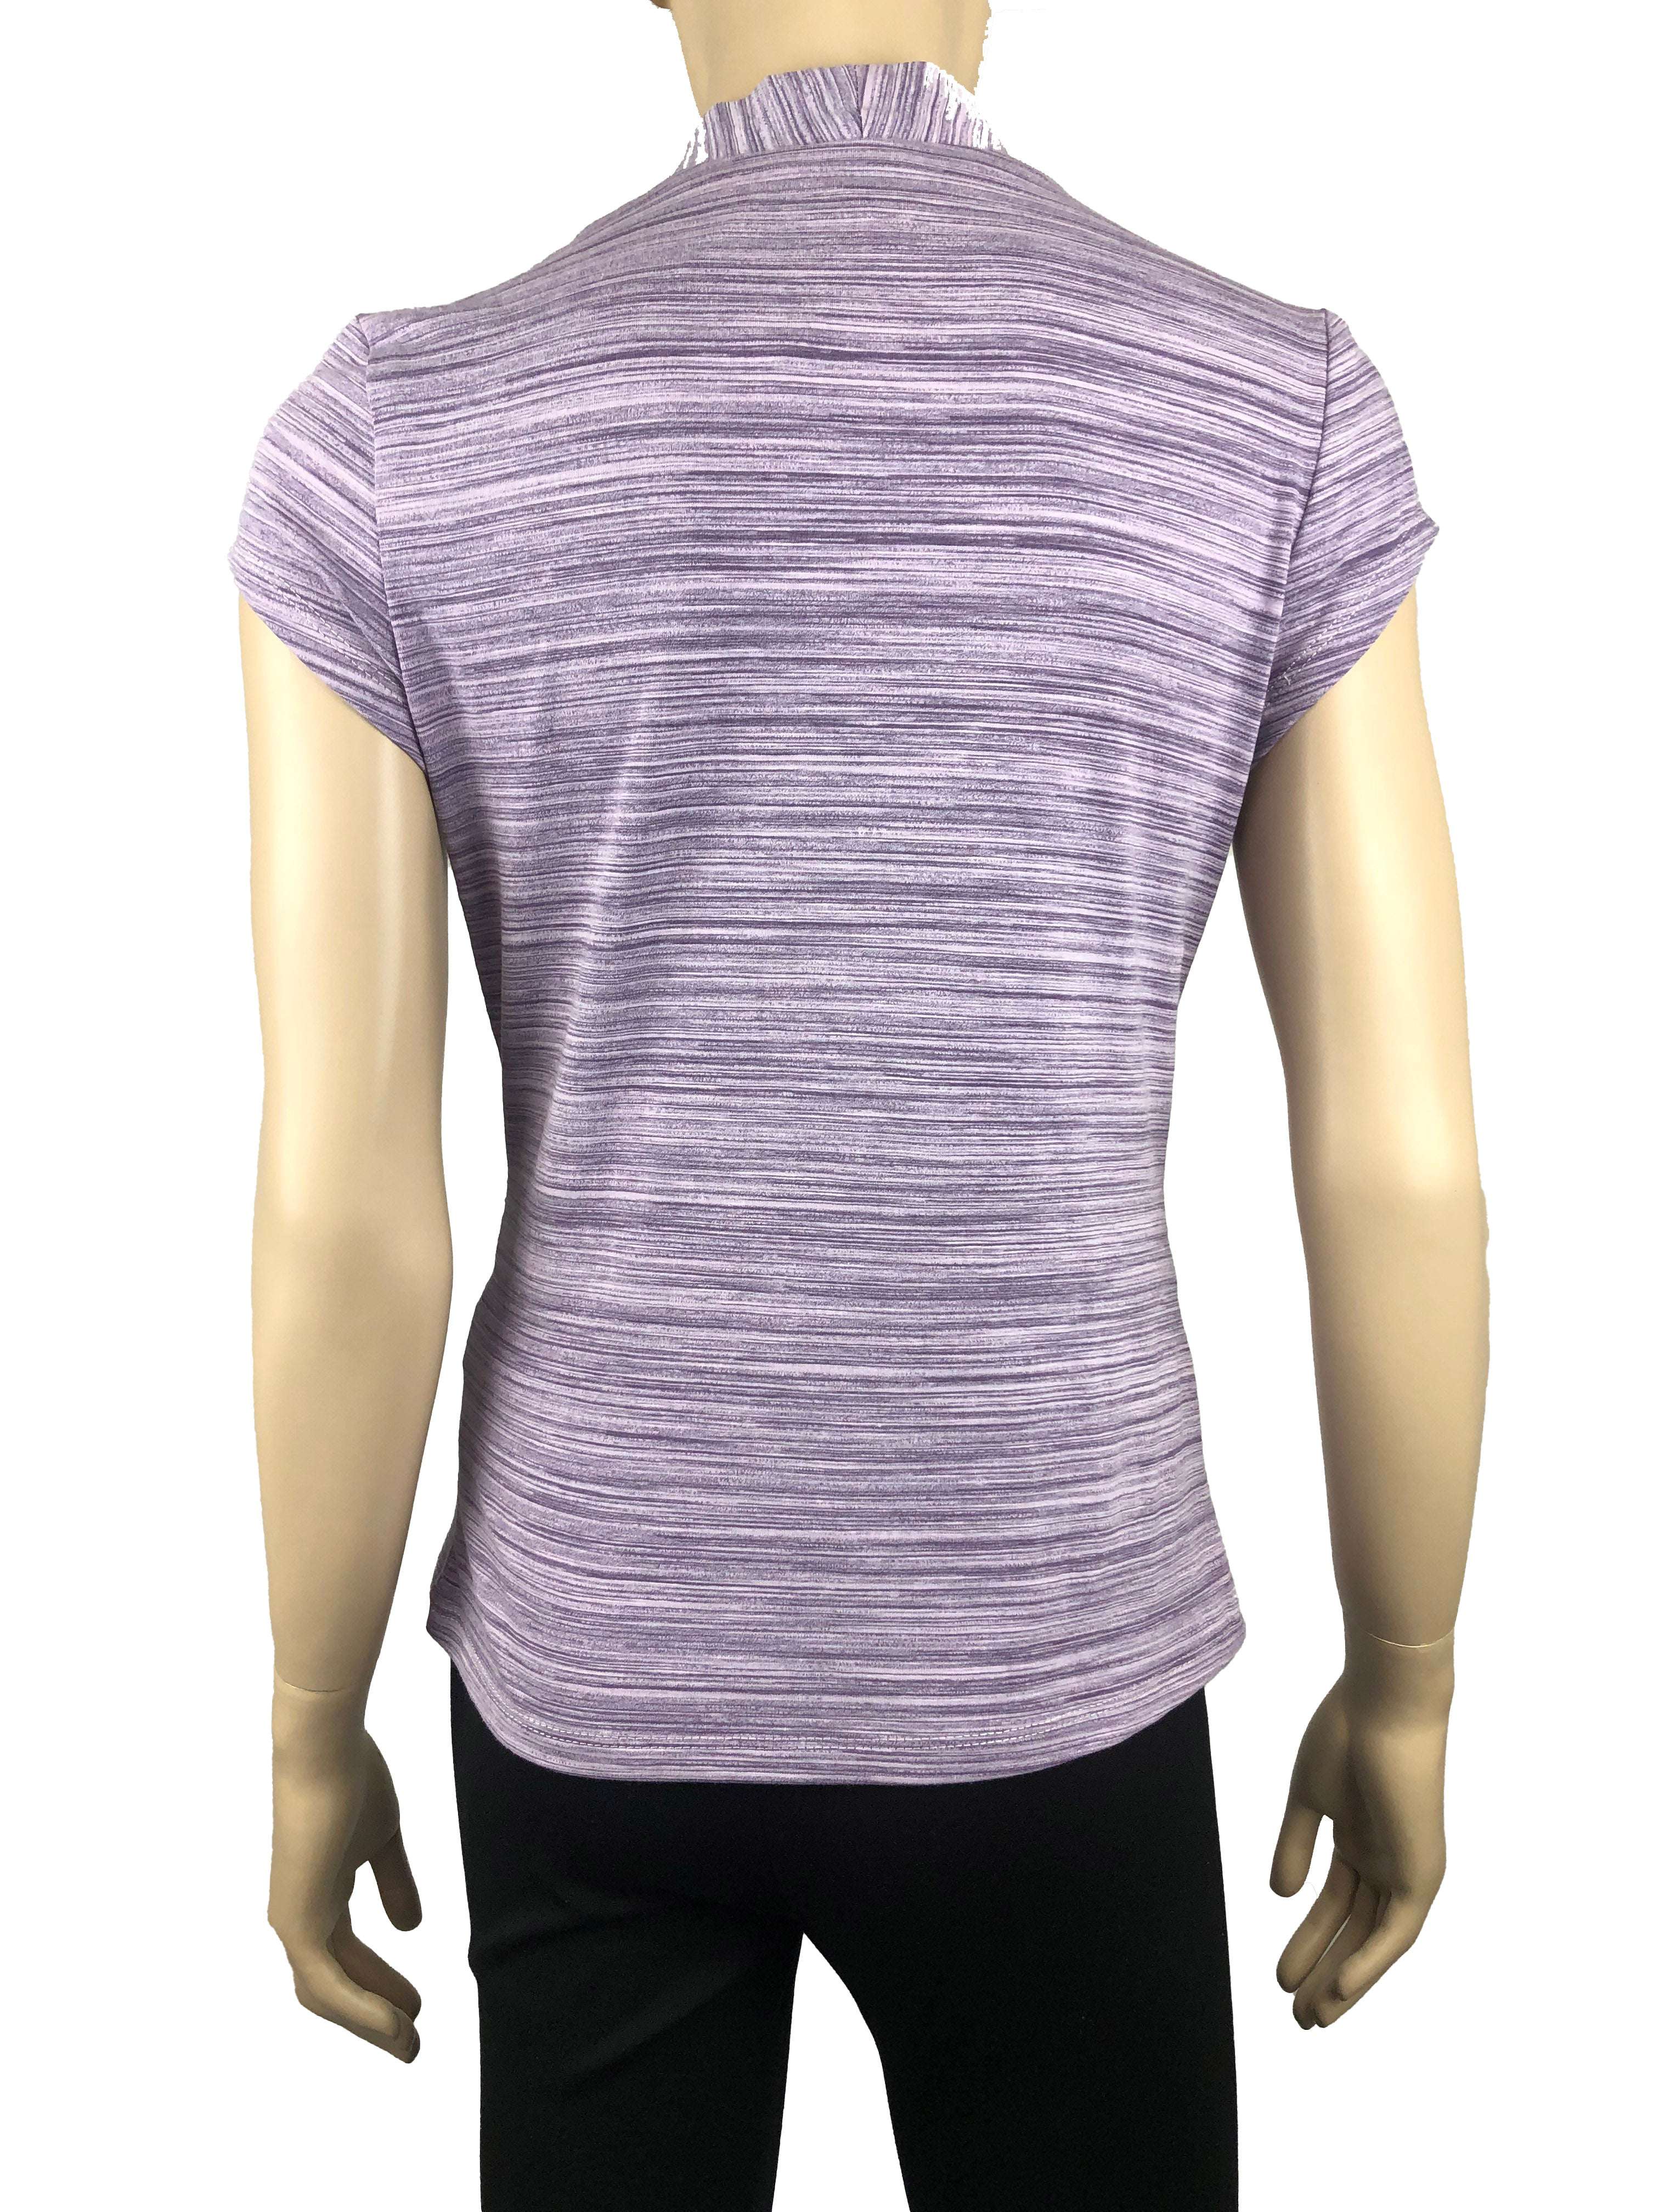 Women's Lilac Top On Sale Quality Stretch fabric Flattering Fit Lilac Top On Sale - Yvonne Marie - Yvonne Marie